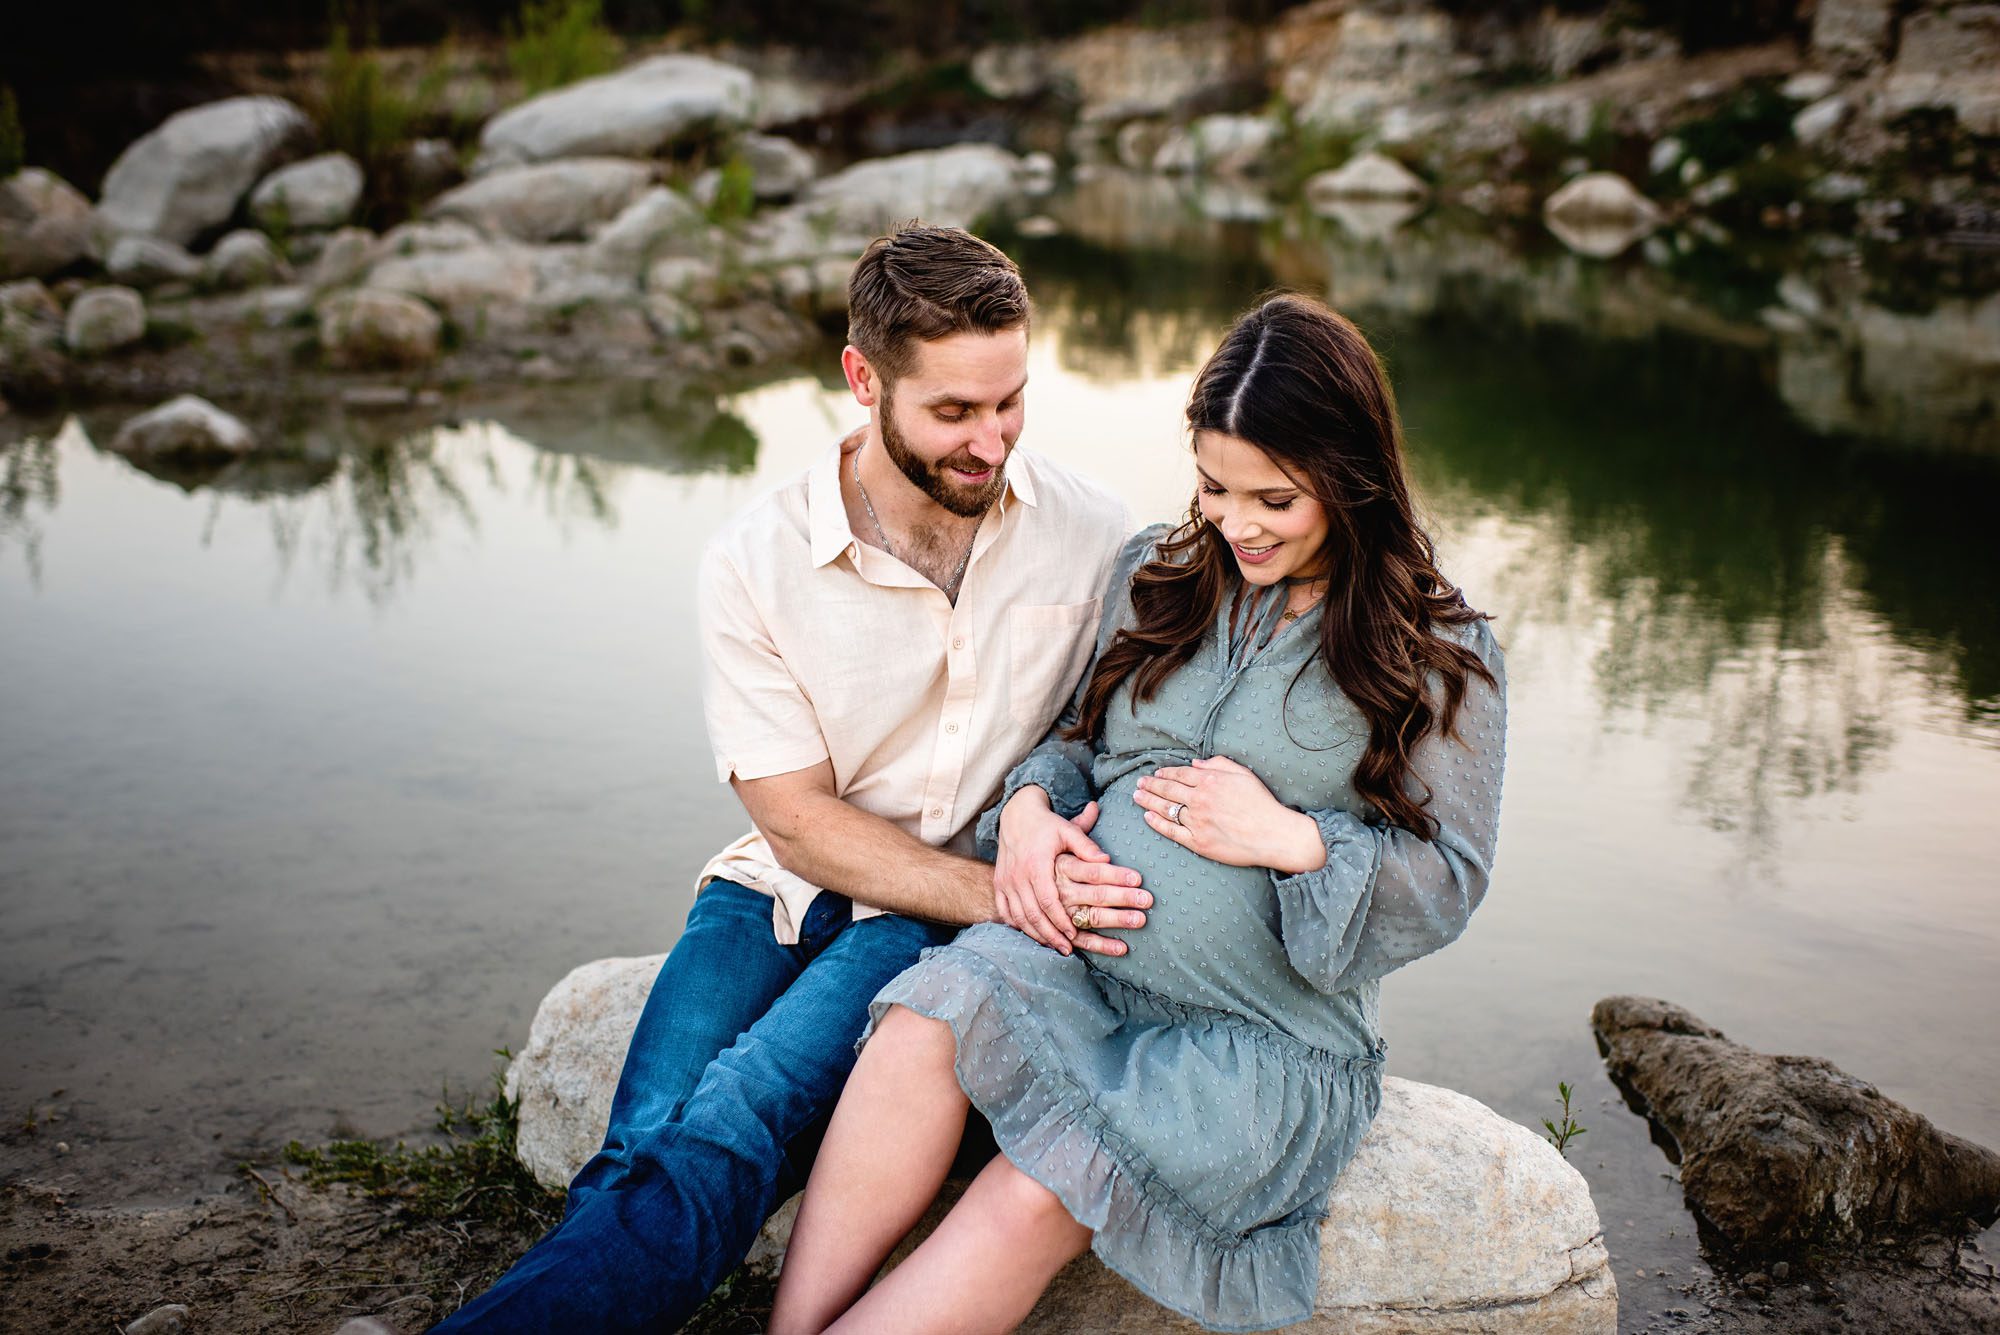 Couple sitting on a rock near a lake looking at mom's baby bump, Maternity photographer in San Antonio